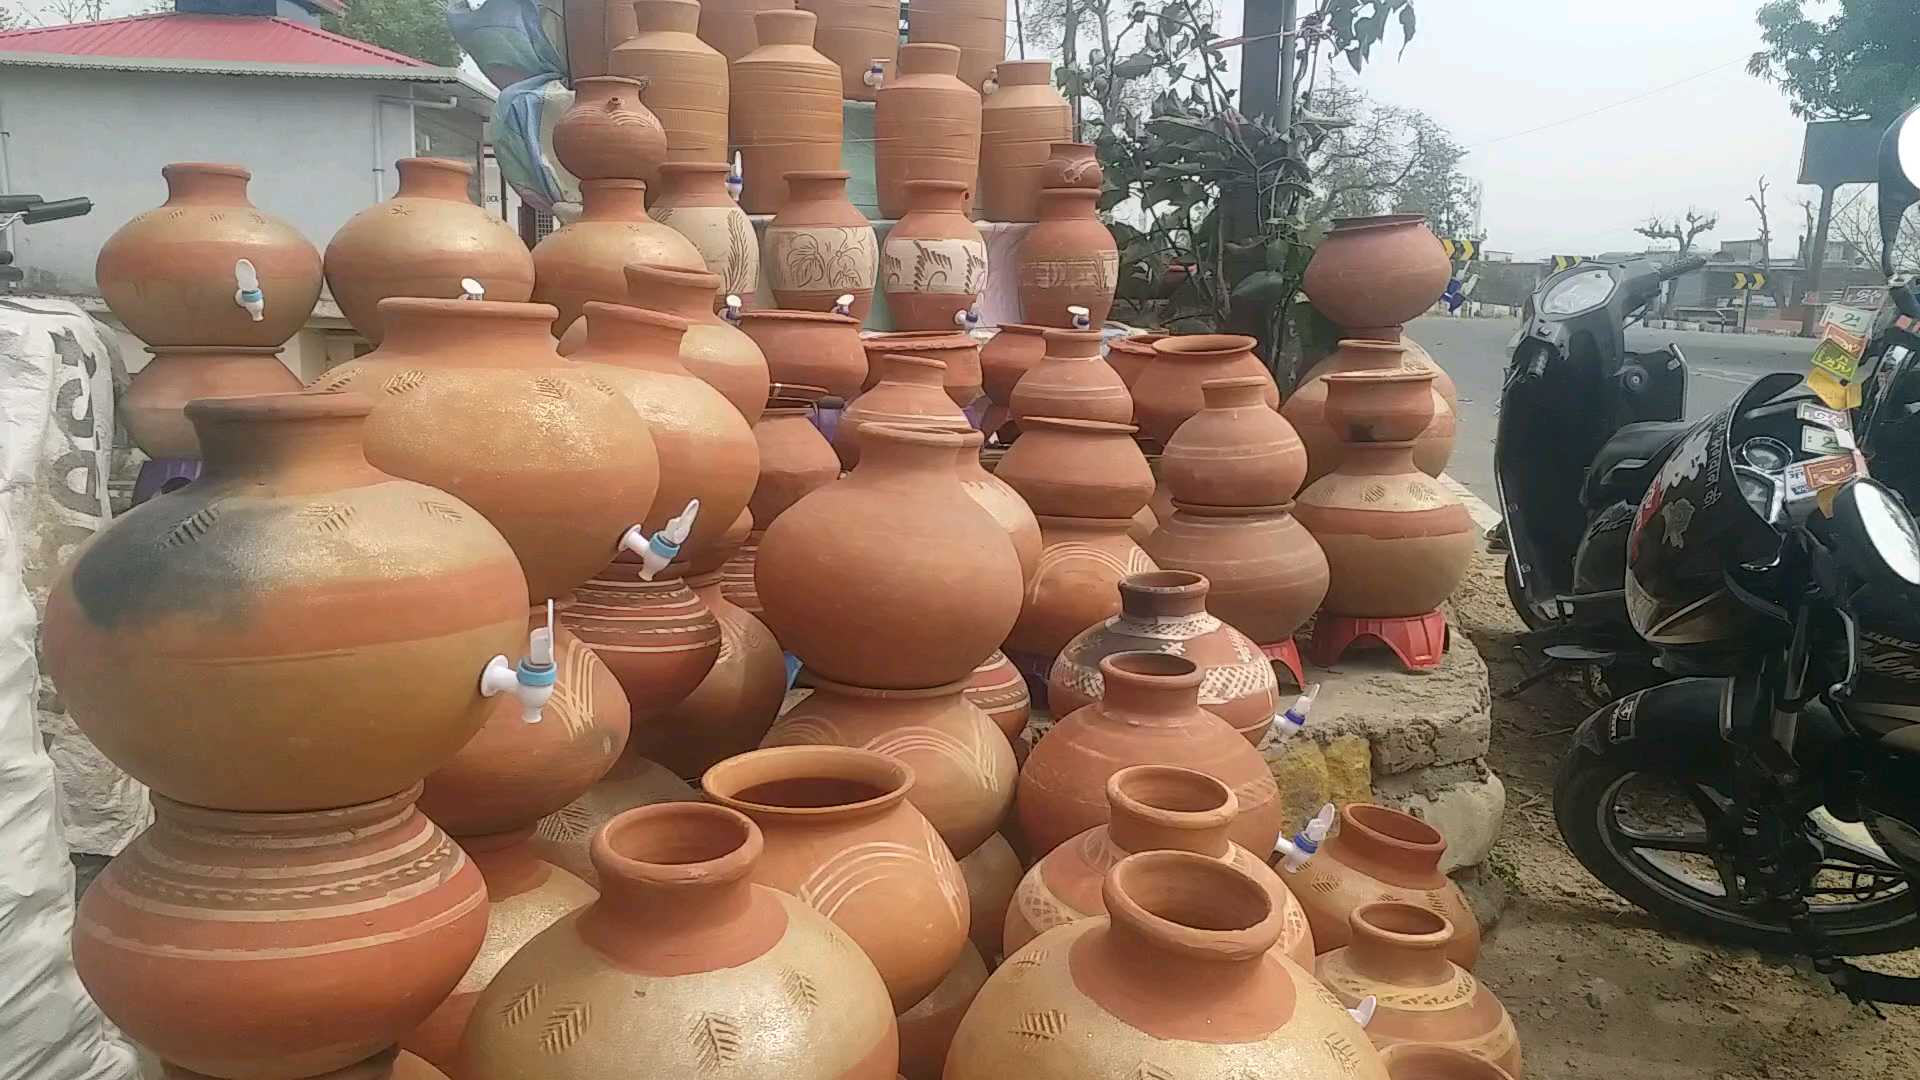 Pottery business in Vikasnagar